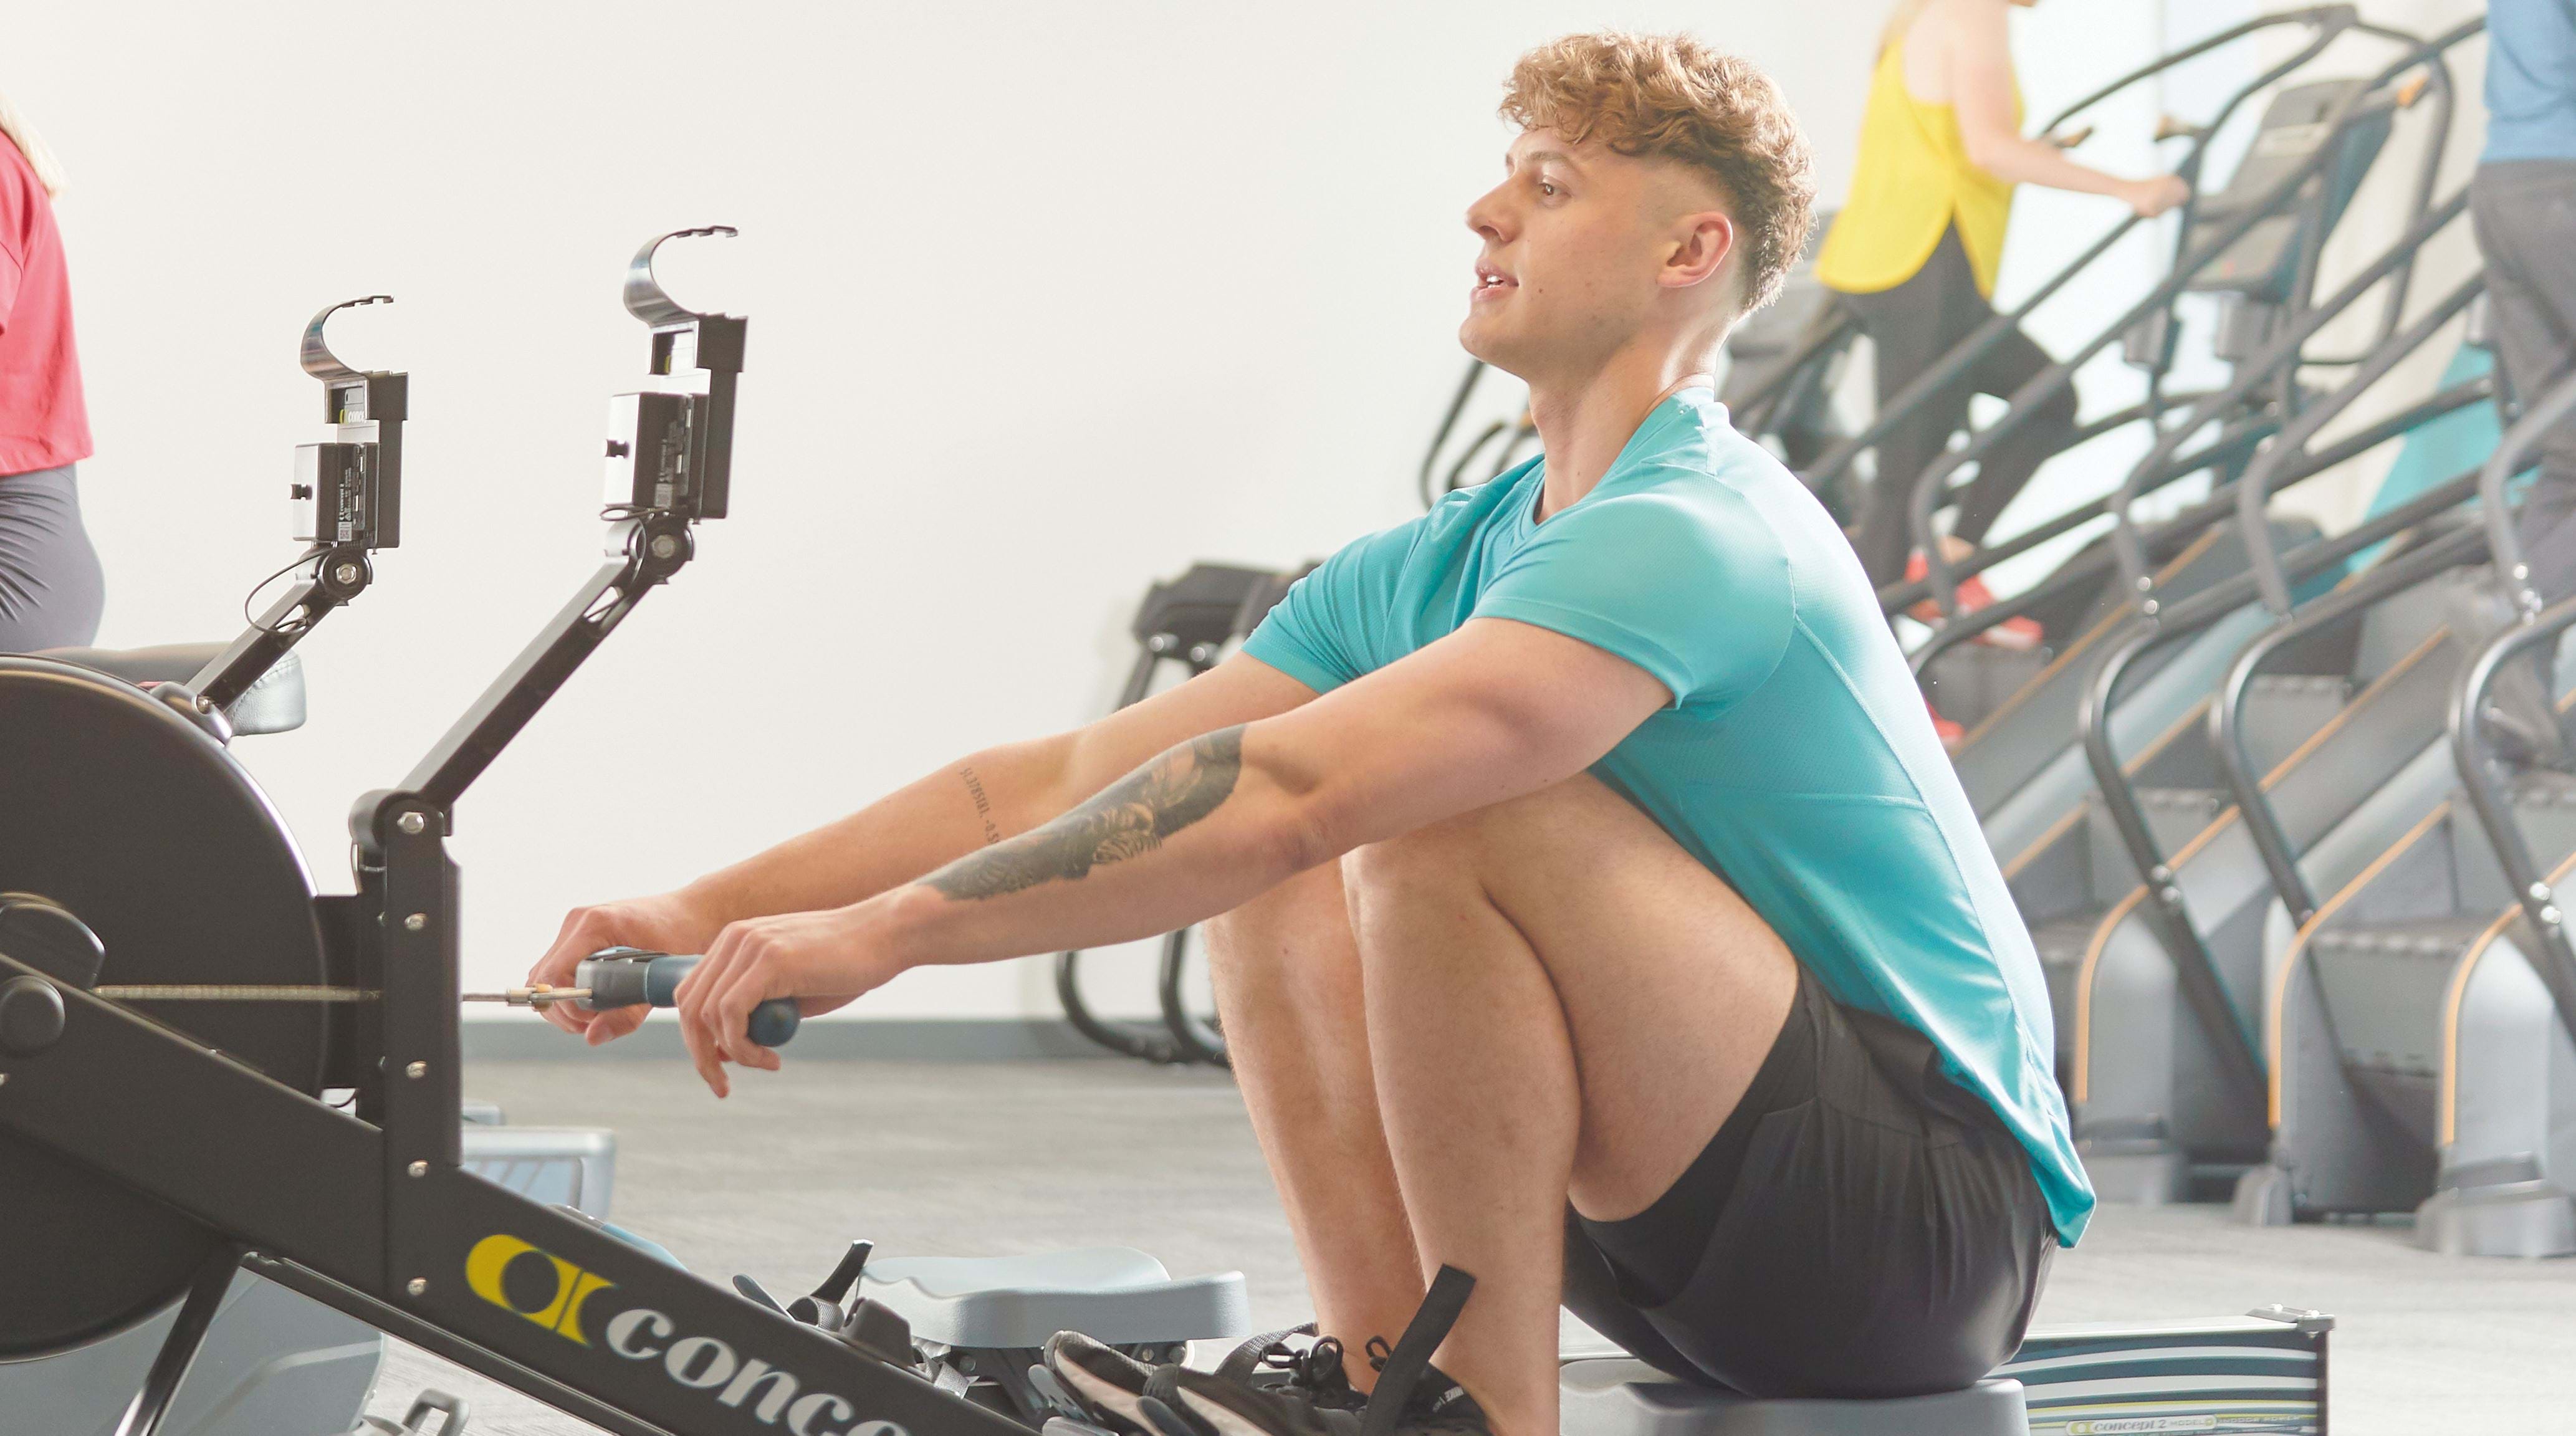 Rowing Machine Muscles: What Muscles Do Rowers Work?